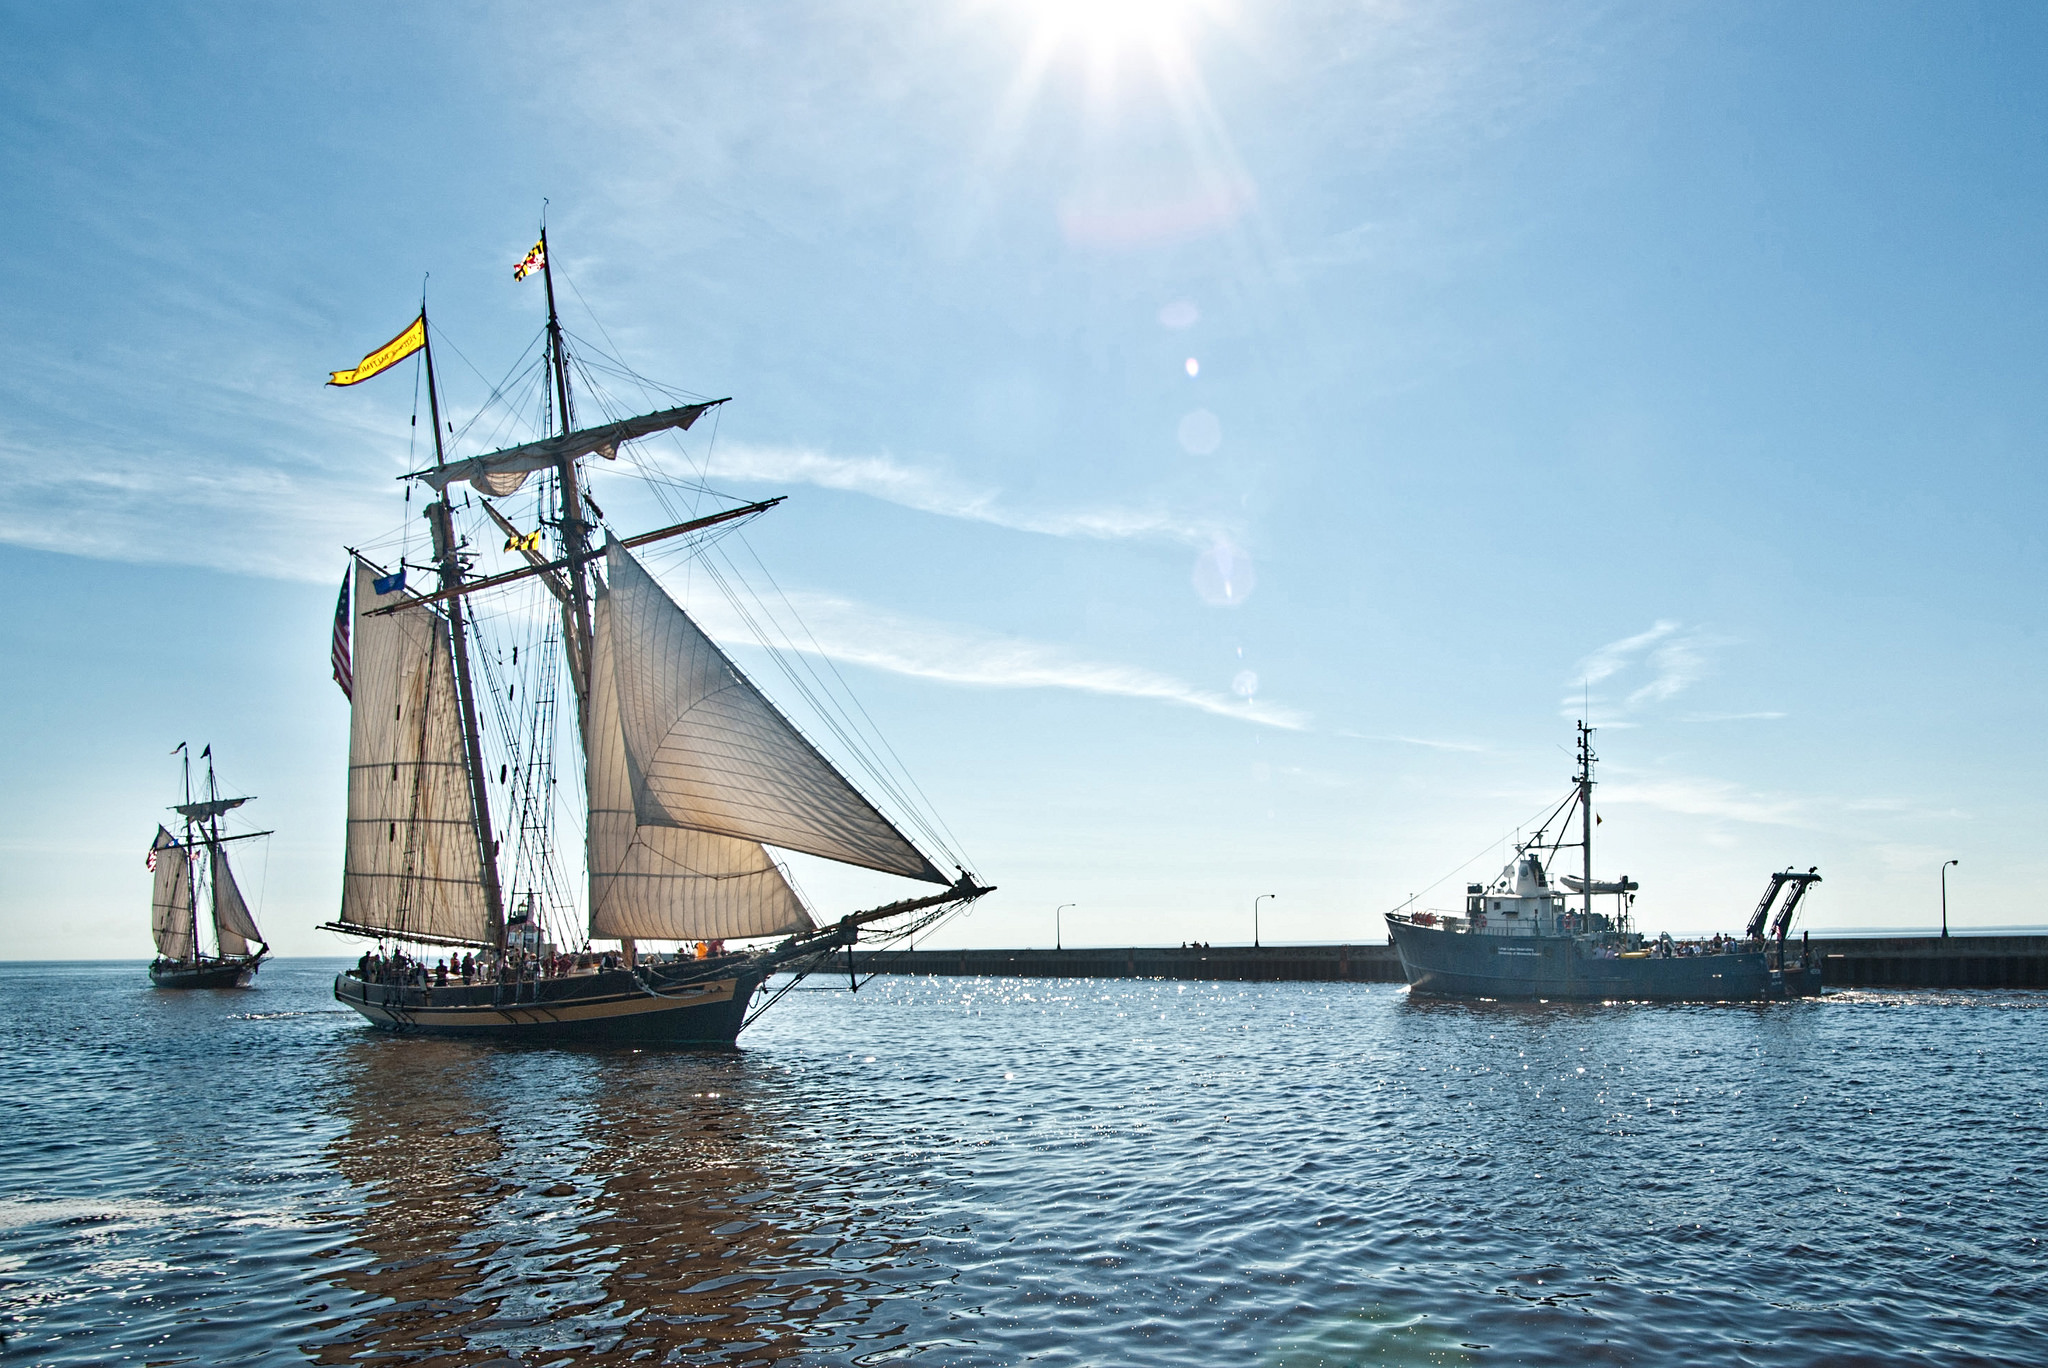 Tall ships visit Duluth